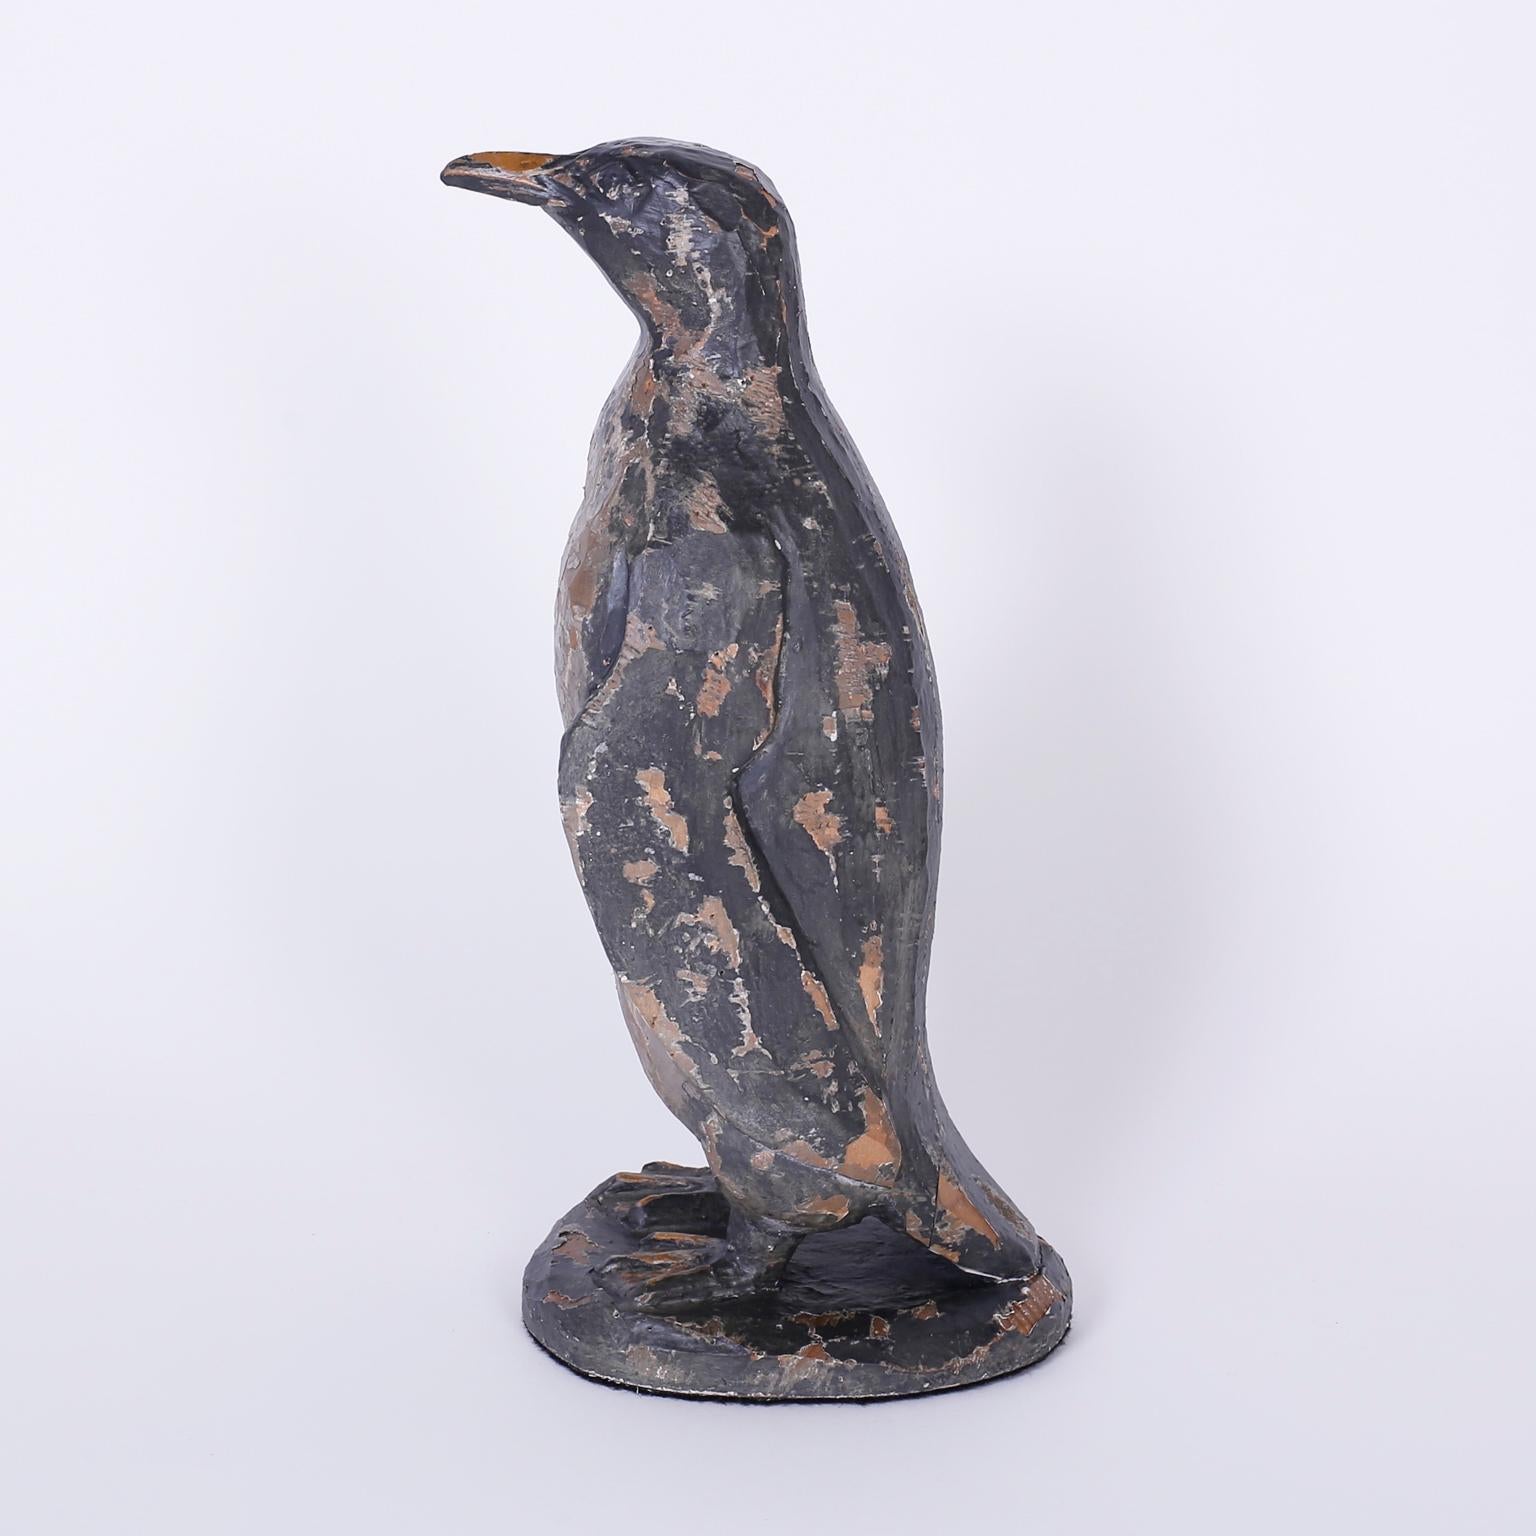 Pair of carved wood penguins or birds with a weathered, time warn patina and a folky, lovable presence.
    